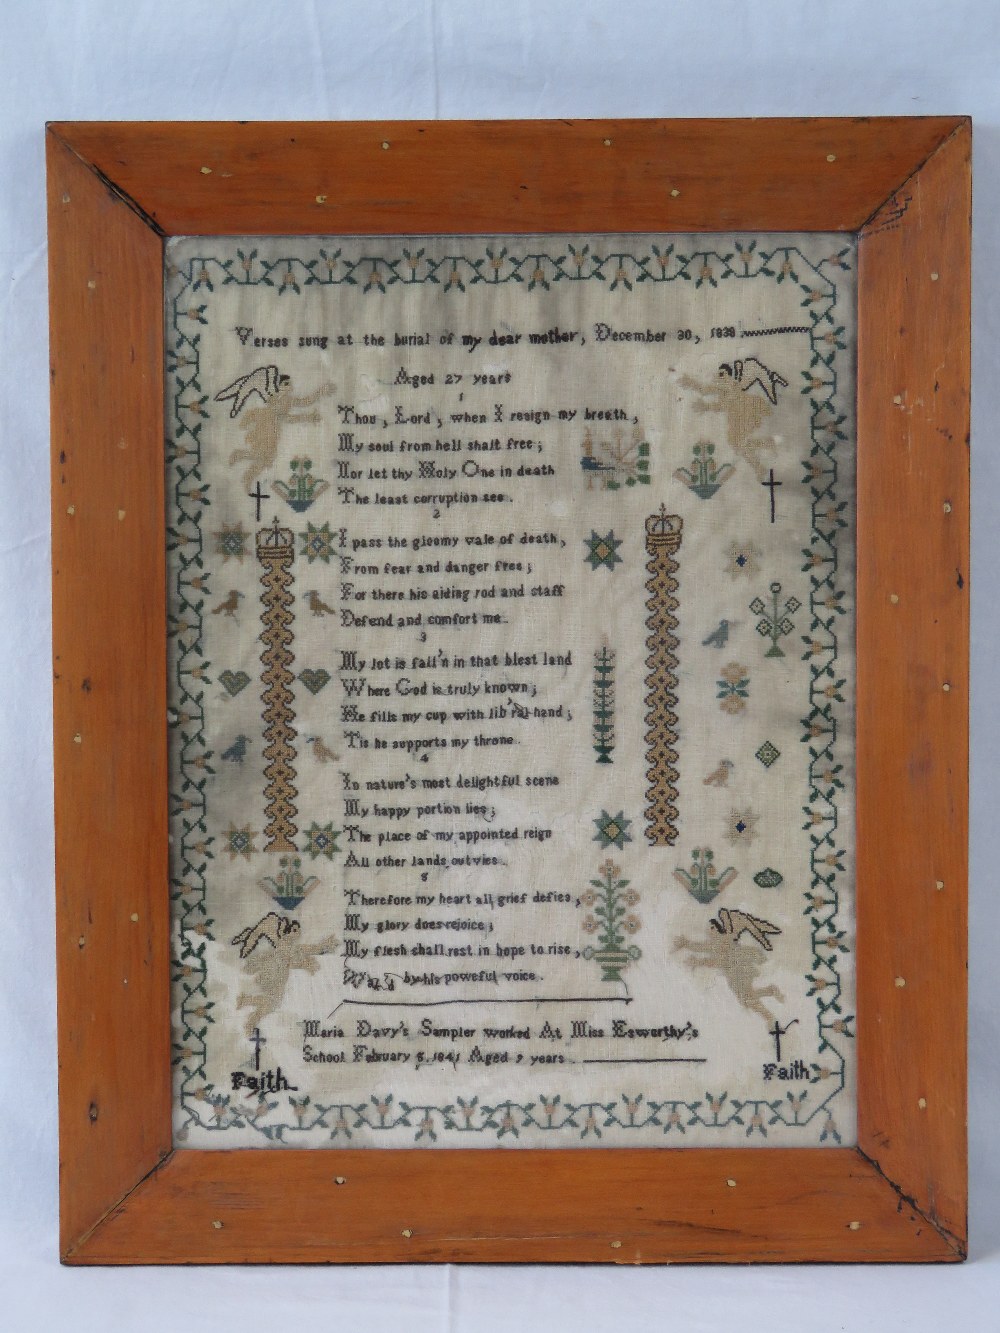 An early 19th century needlework sampler with five verse poem 'Thou Lord when i resign my breath'